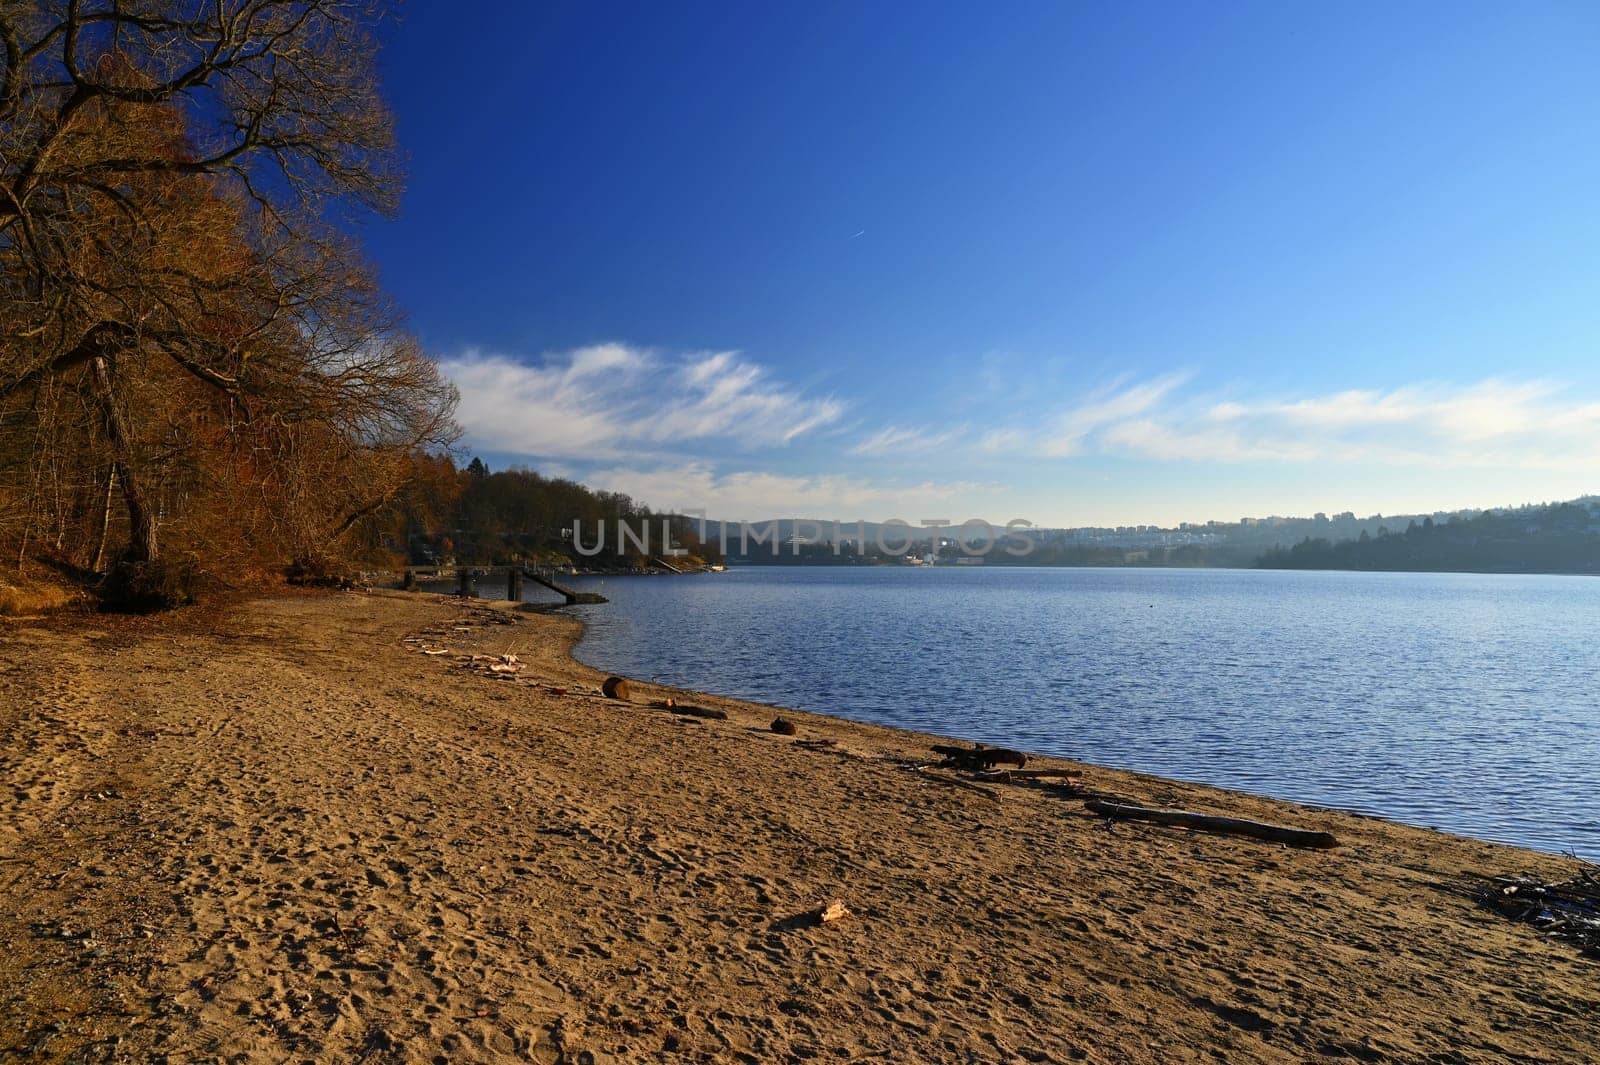 Brno Reservoir - City of Brno - Czech Republic - Europe. Beautiful landscape with water and beach. Nice sunny weather with blue sky in winter time.